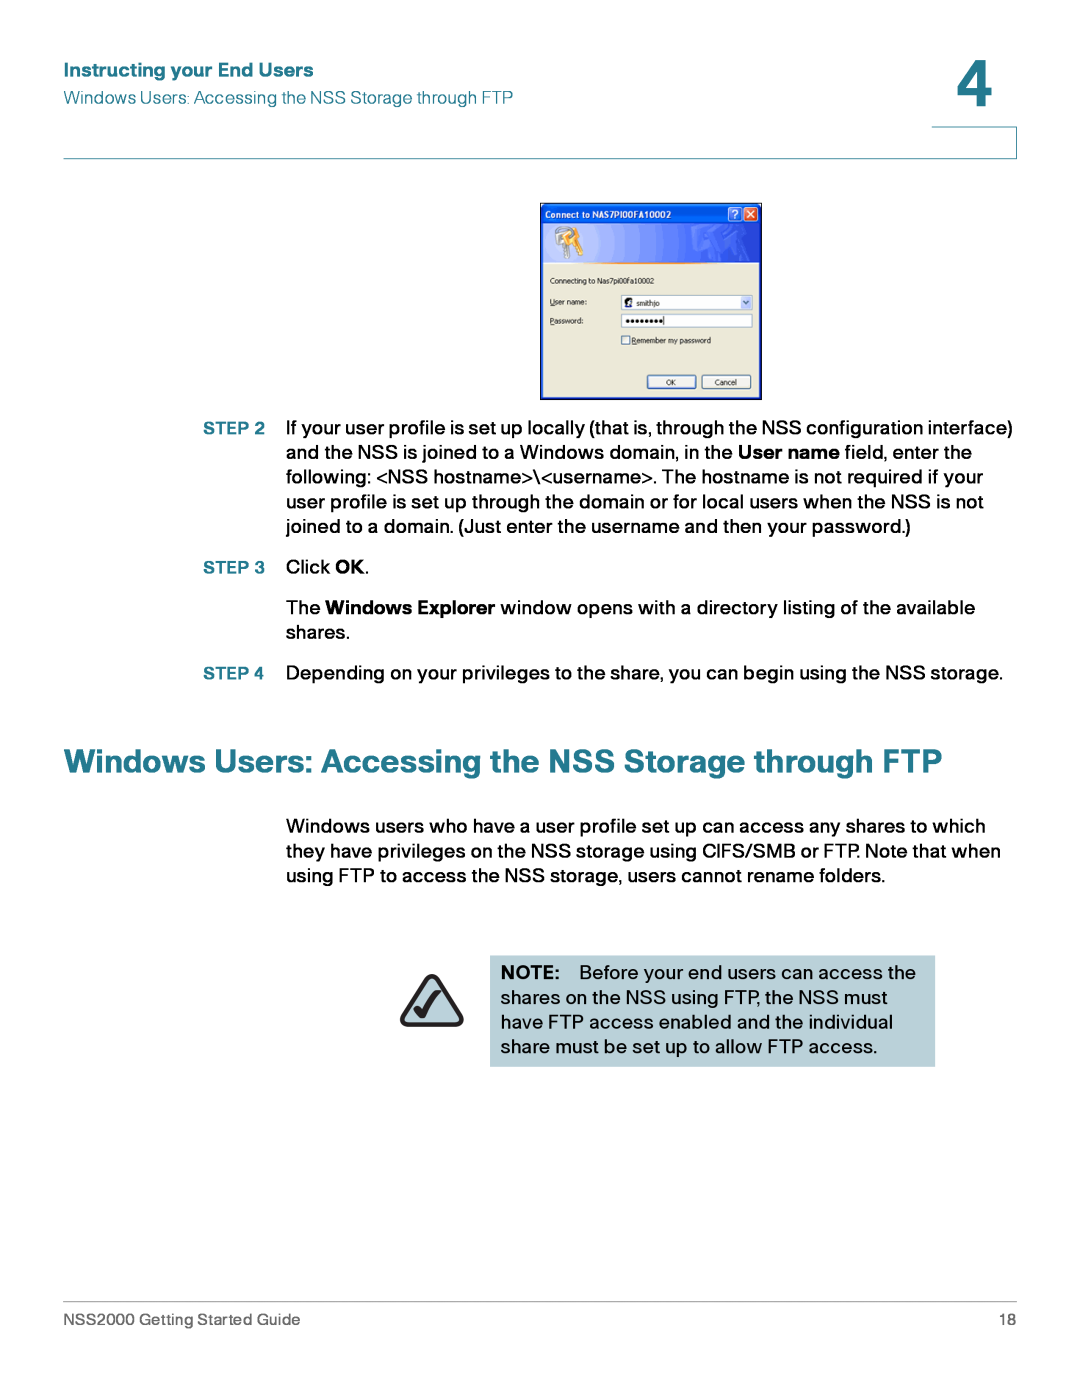 Cisco Systems NSS2000 Series manual Windows Users Accessing the NSS Storage through FTP, Instructing your End Users 